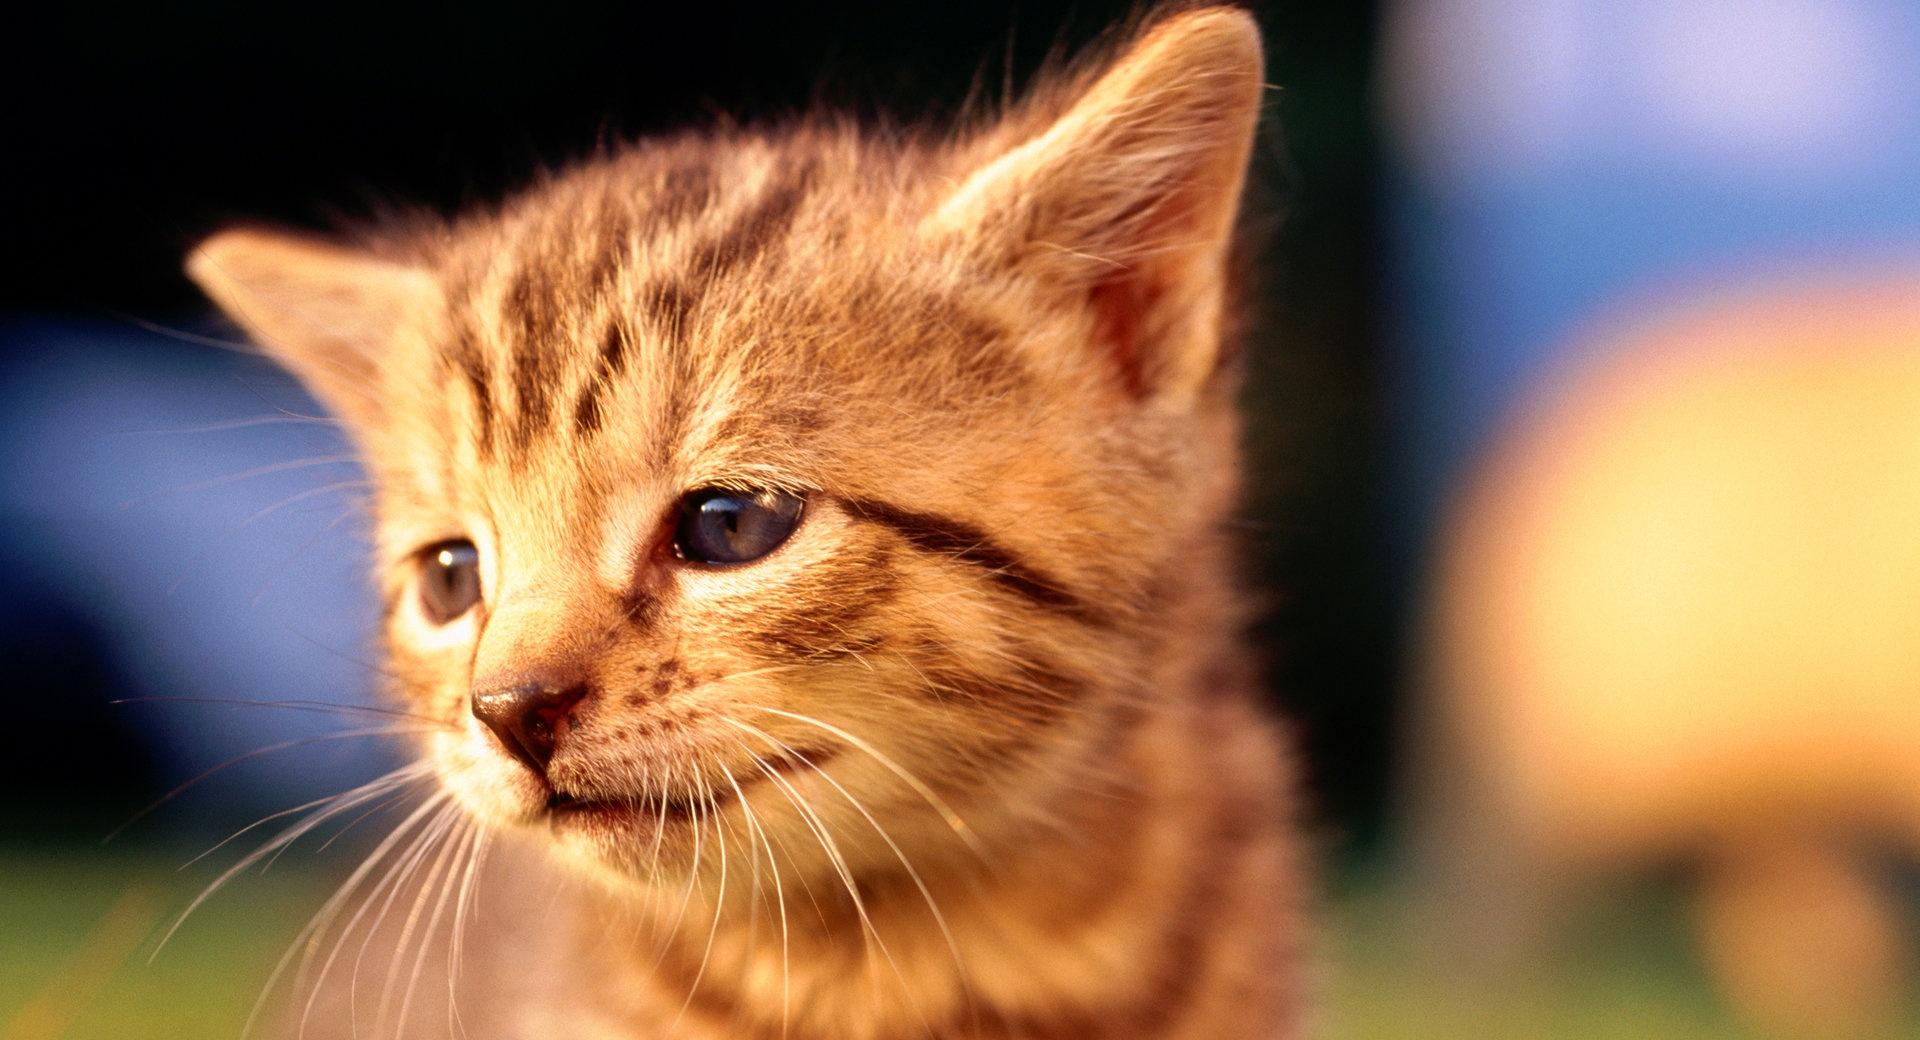 Sad Kitten Face wallpapers HD quality